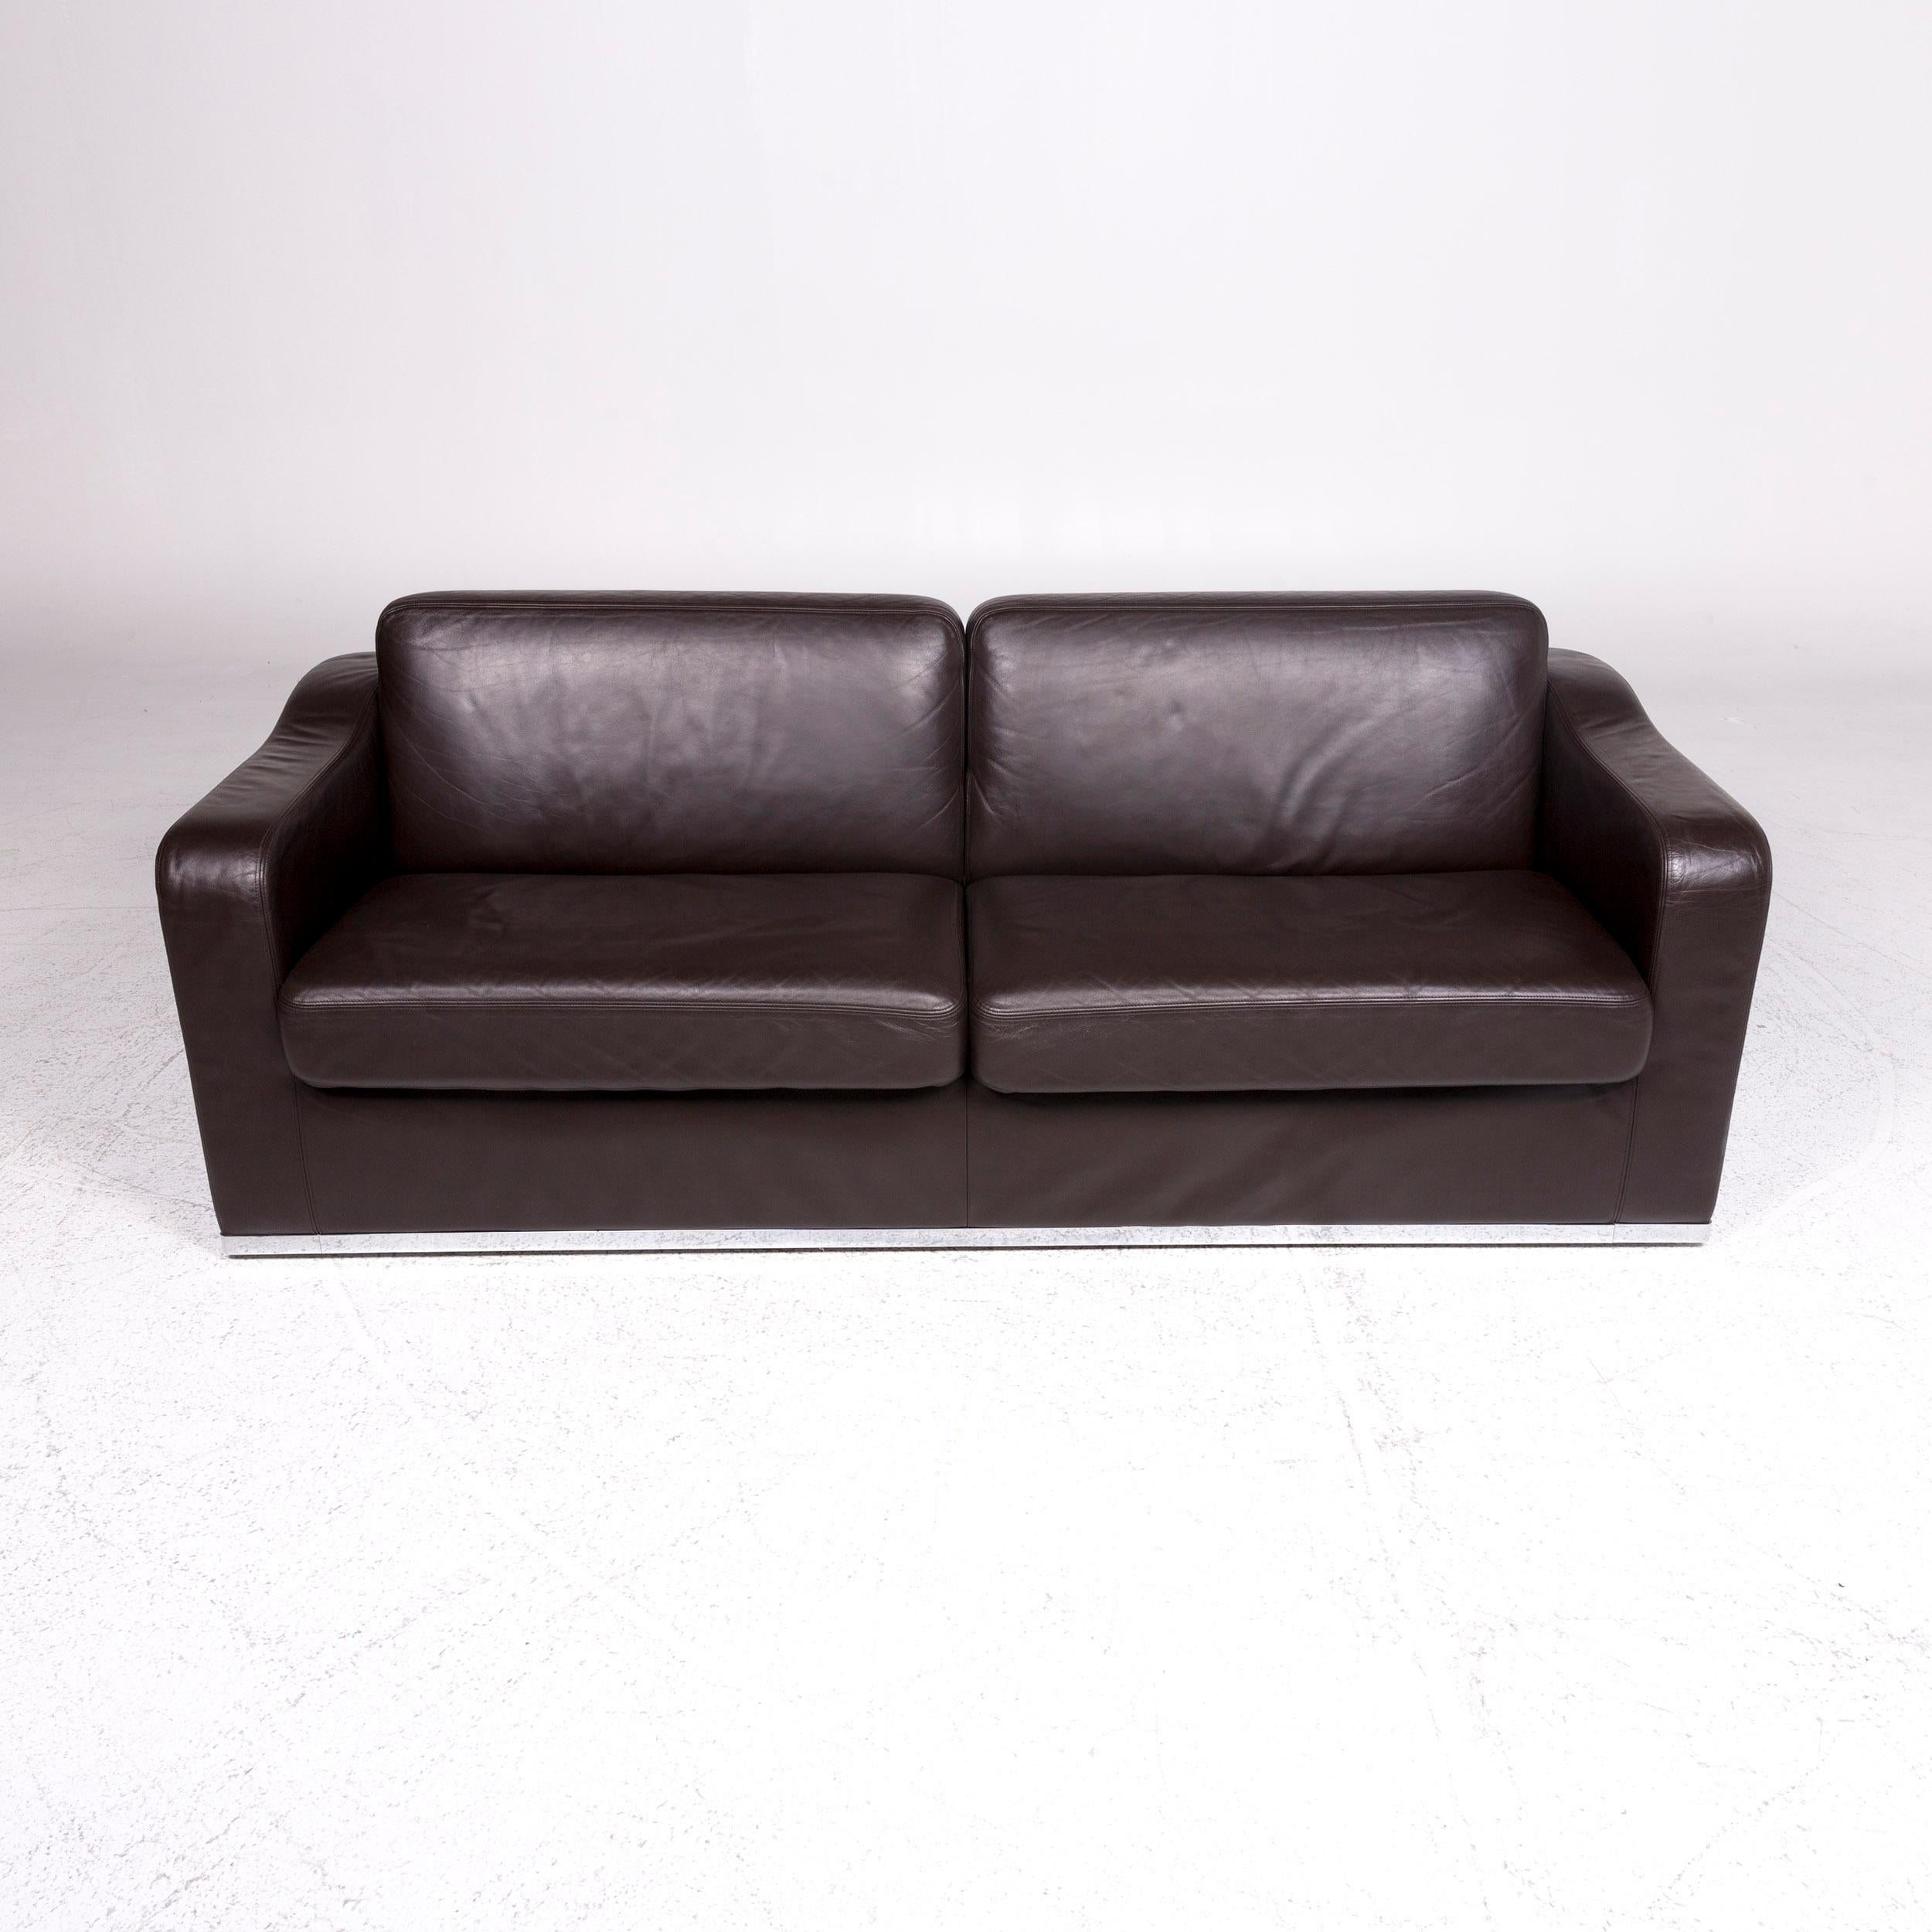 De Sede Ds 6 Leather Sofa Brown Two-Seat Couch For Sale 2